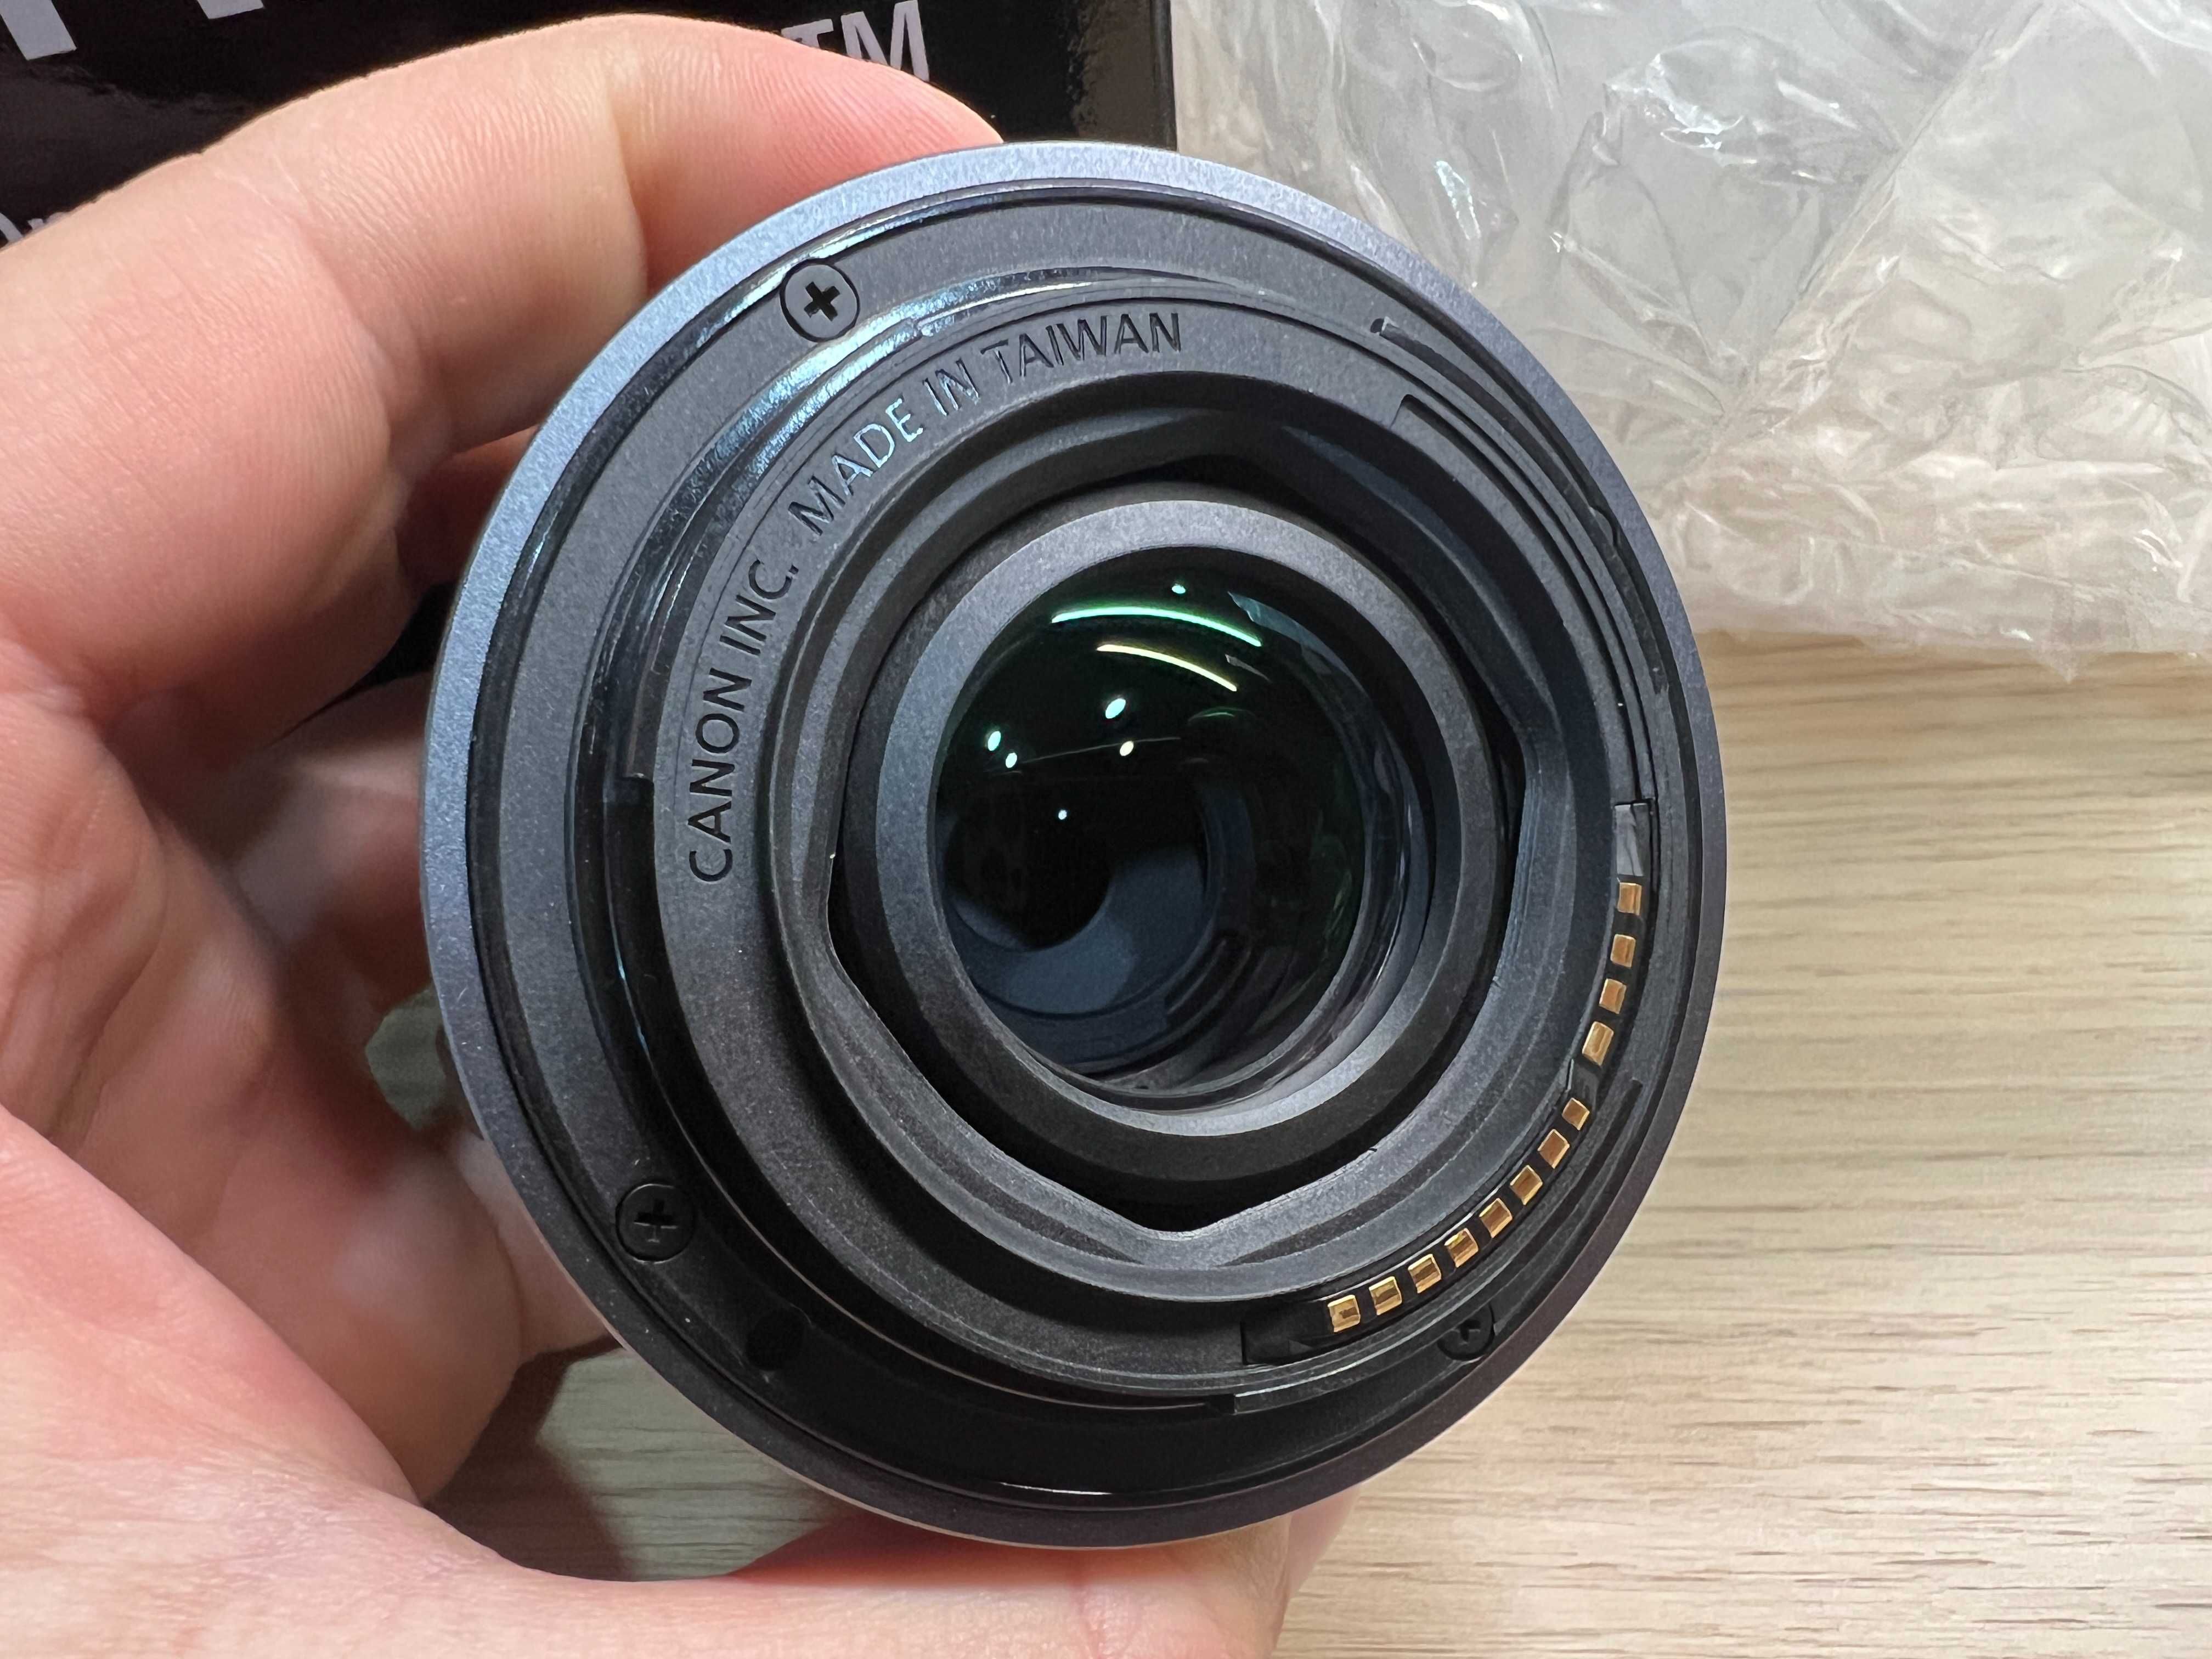 Canon RF 24mm-50mm F4.5 - 6.3 IS STM